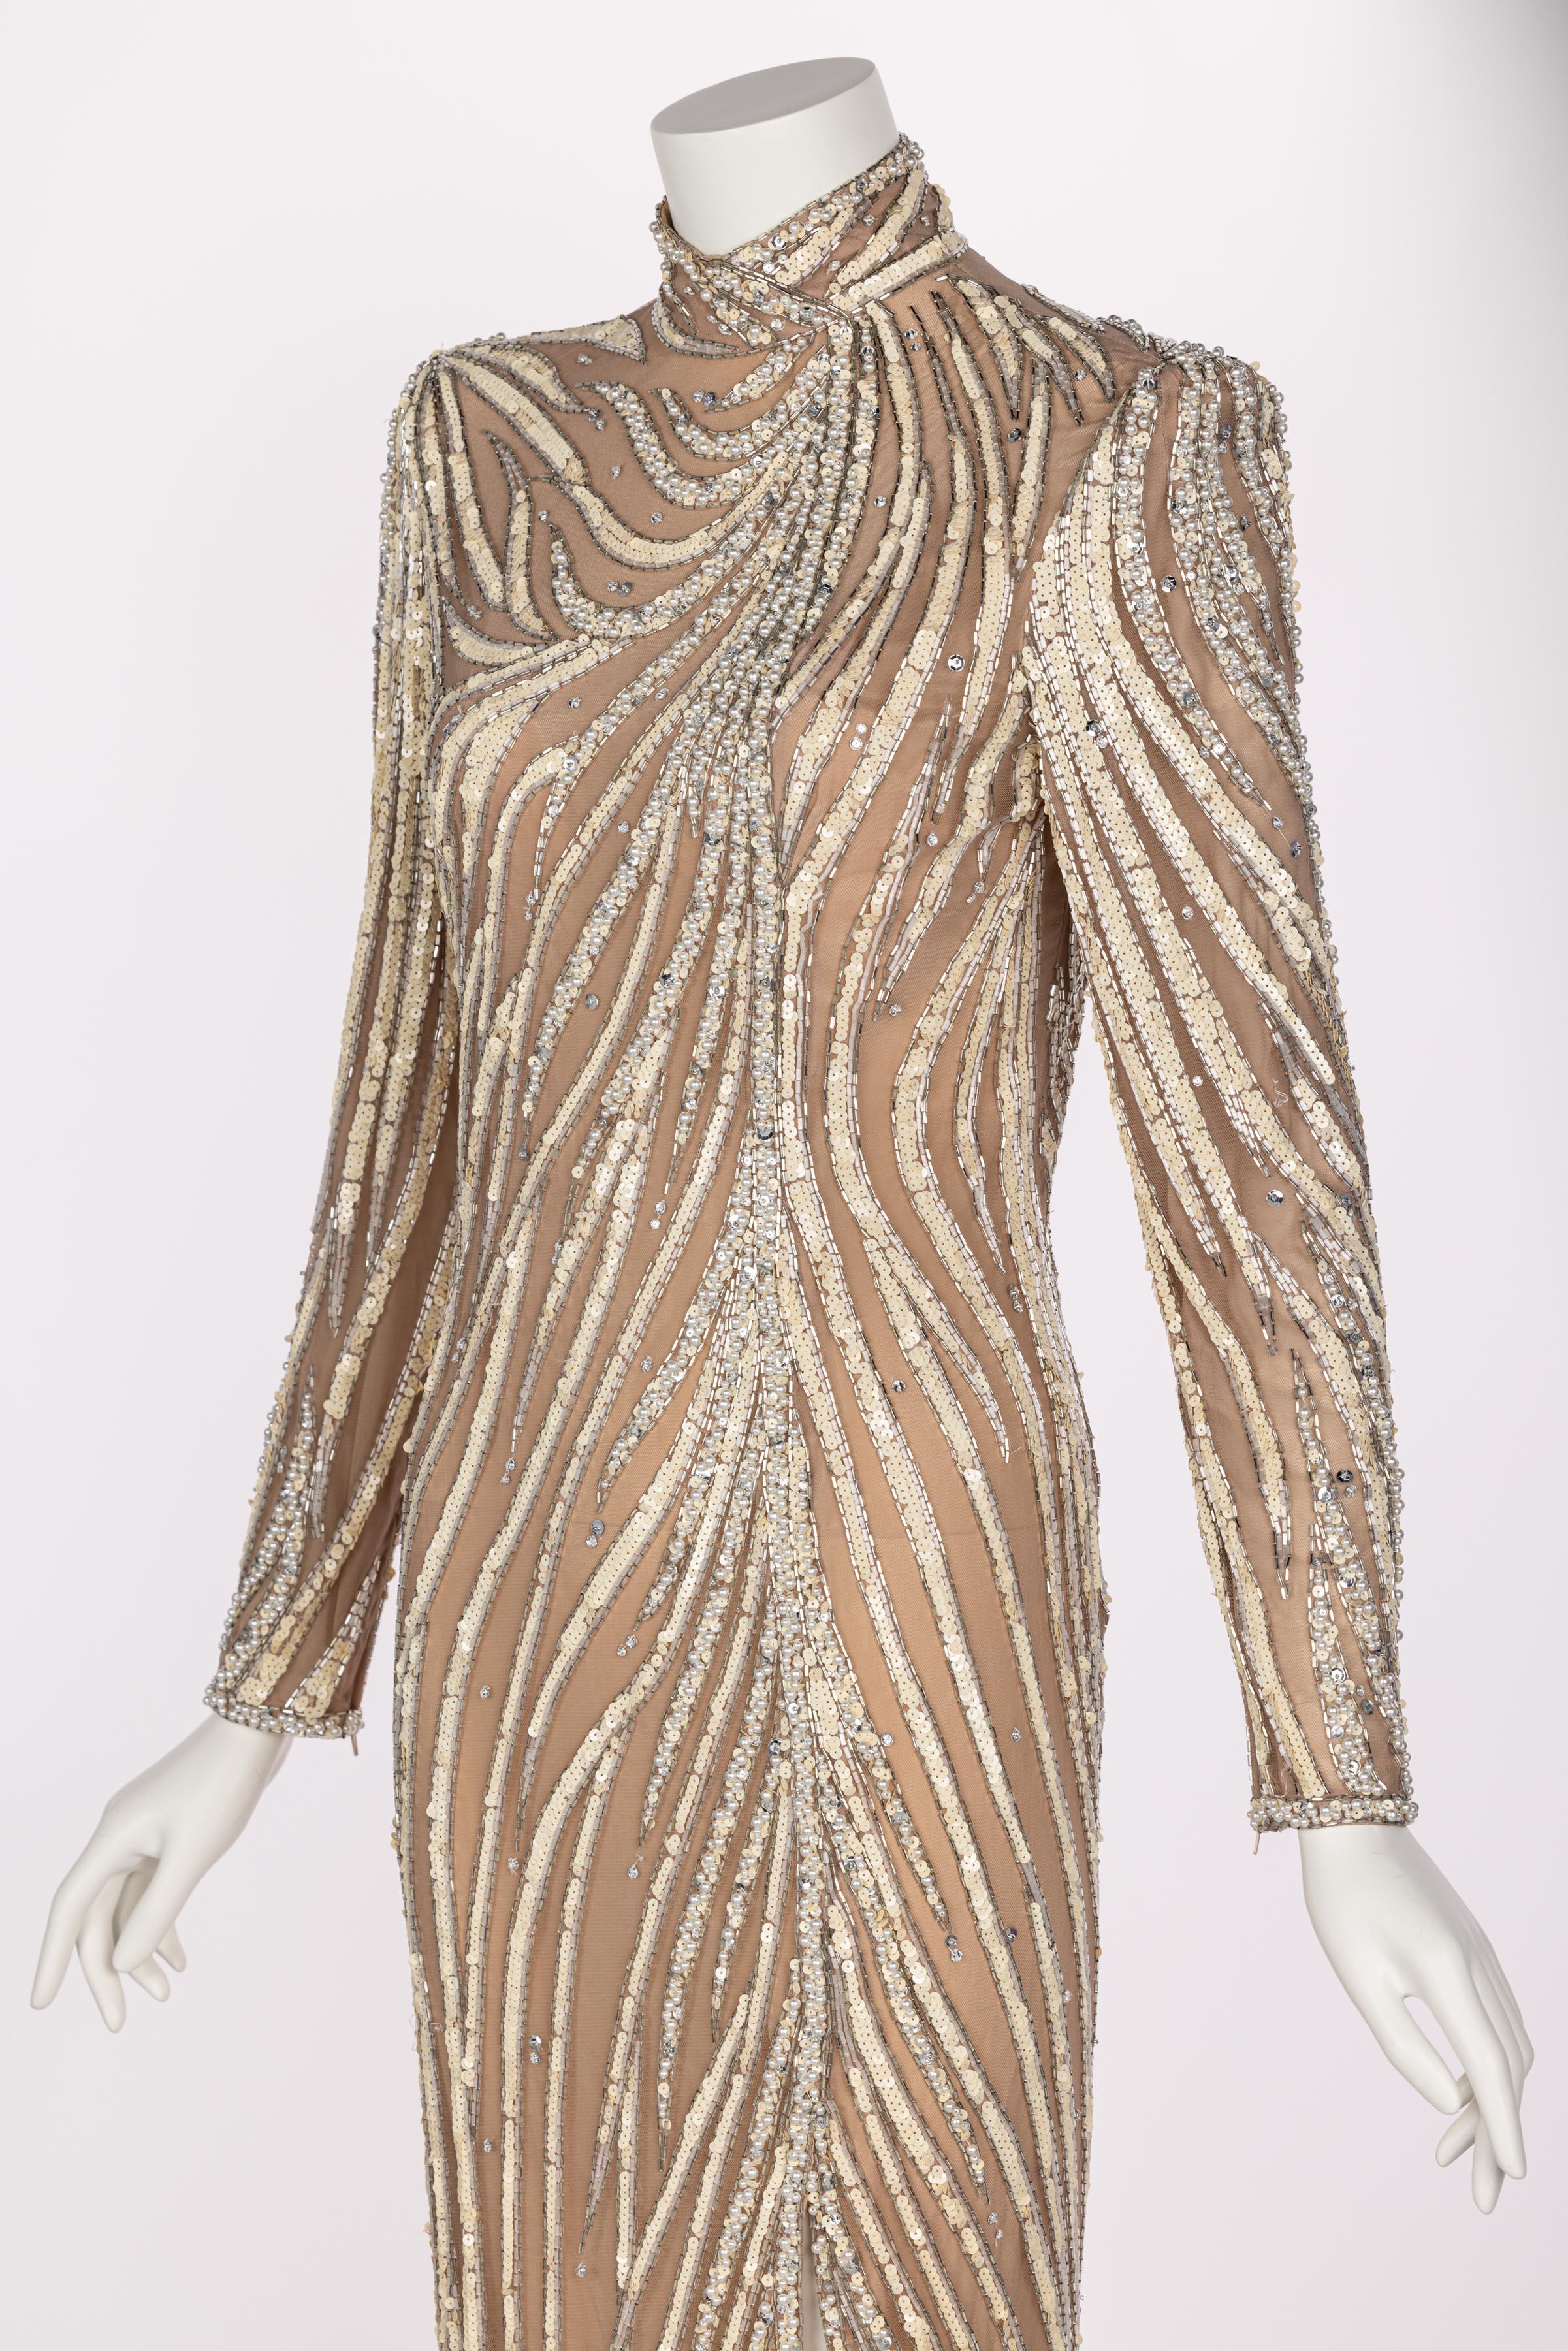 Bob Mackie Ivory Sequin, Pearls & Nude Stretch Net Thigh High Slit Dress, 1980s In Excellent Condition For Sale In Boca Raton, FL